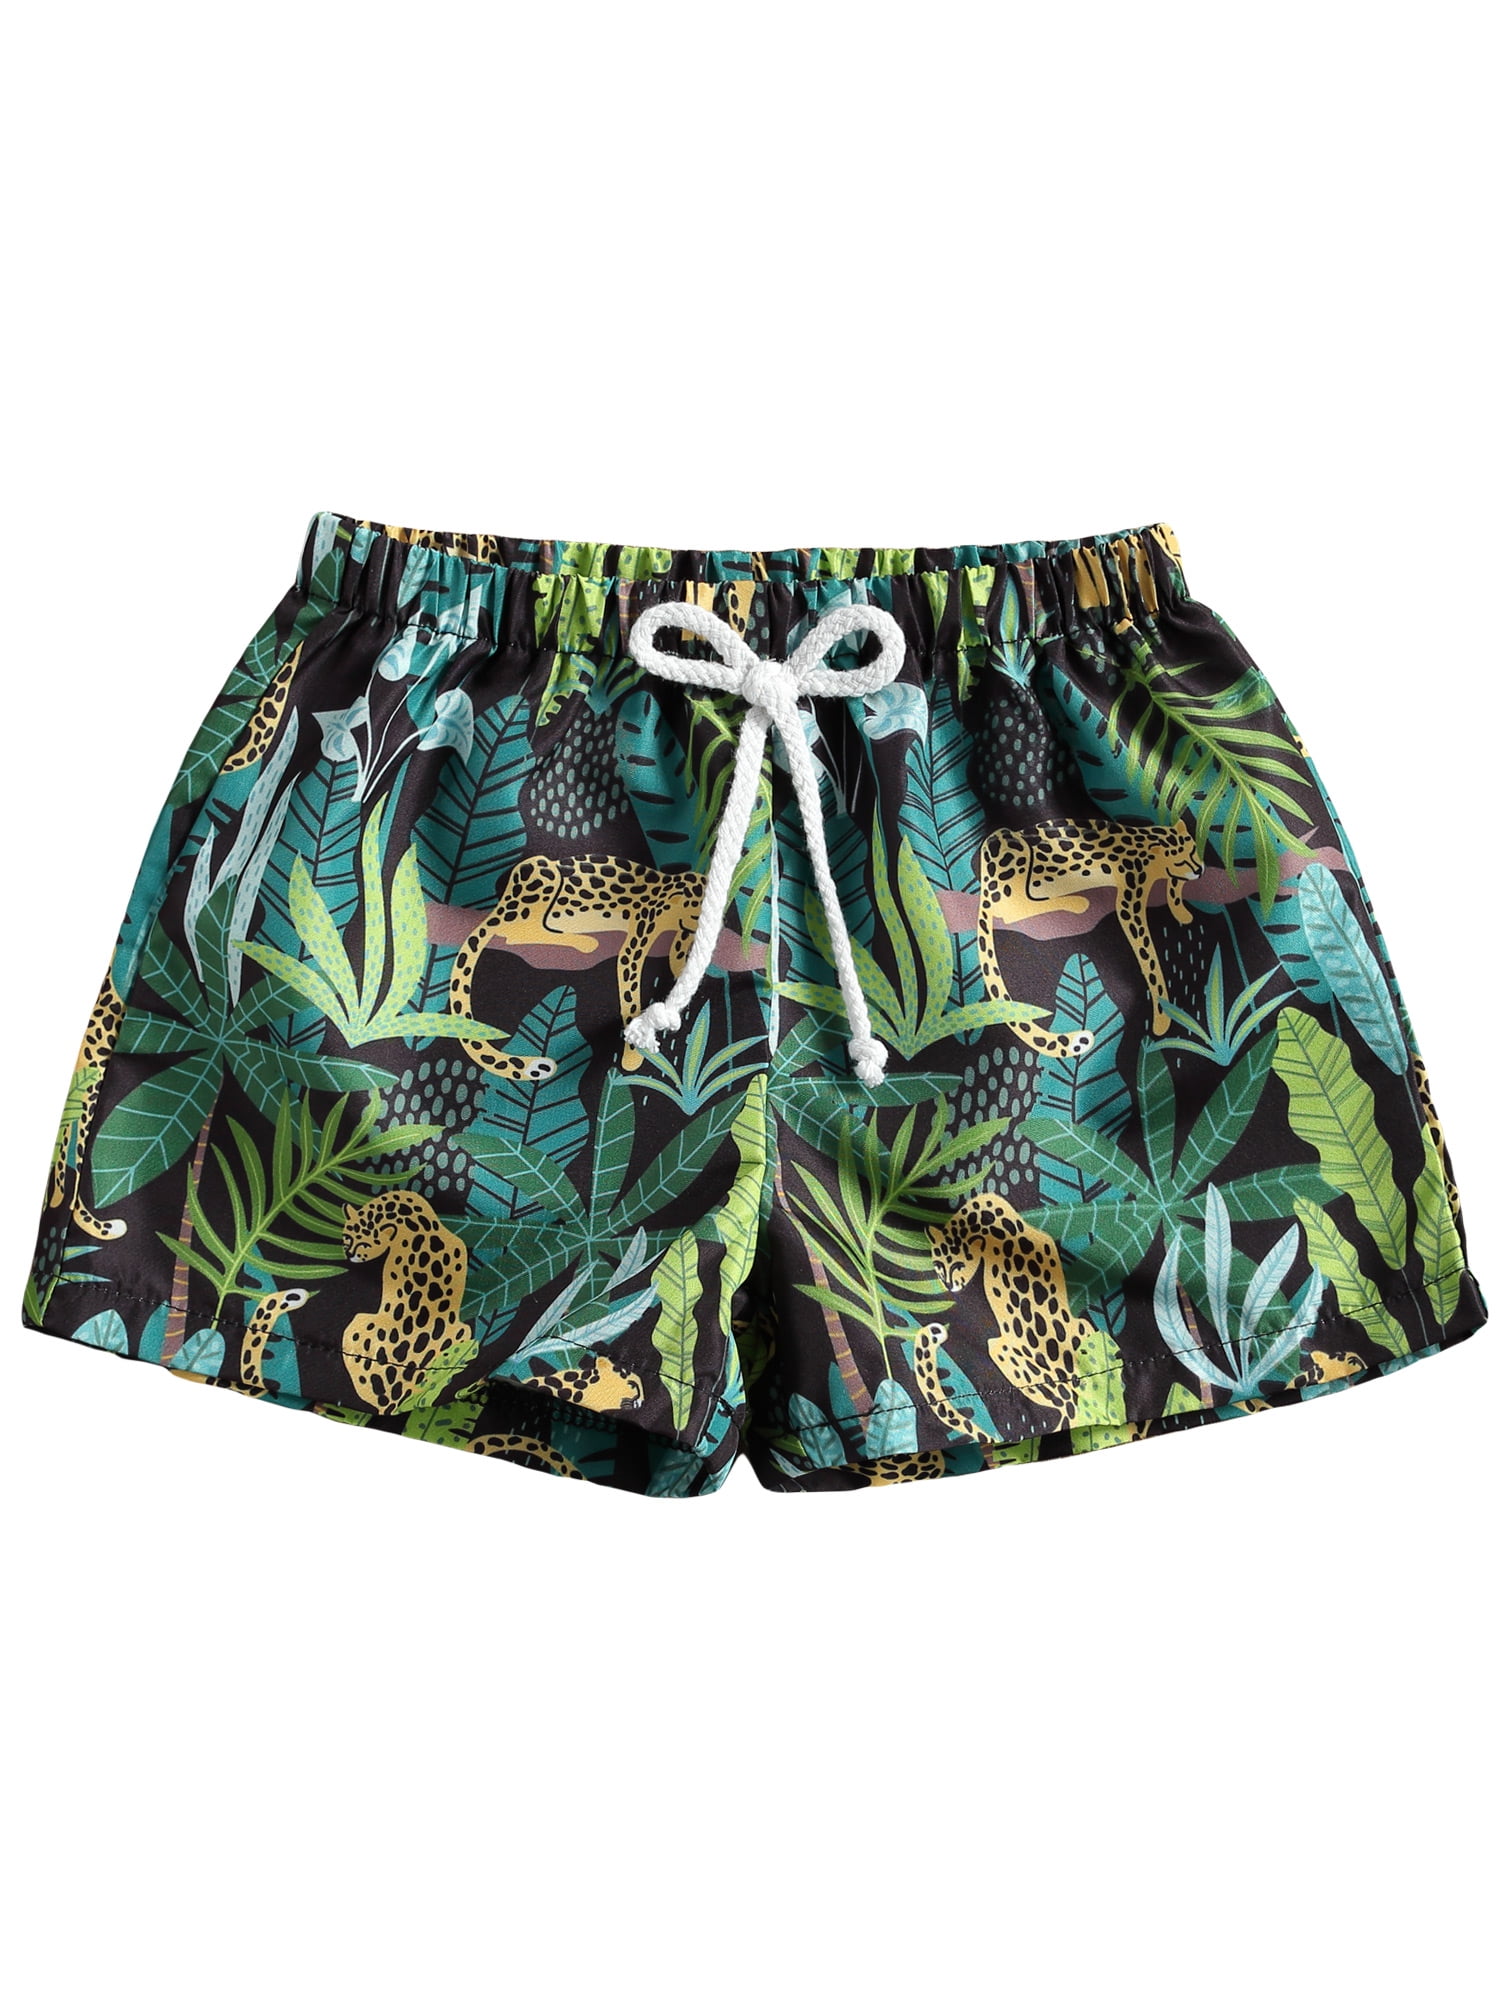 JERECY Mens Swim Trunks Vintage Retro Forest Rabbit Bird Tree Quick Dry Board Shorts with Drawstring and Pockets 